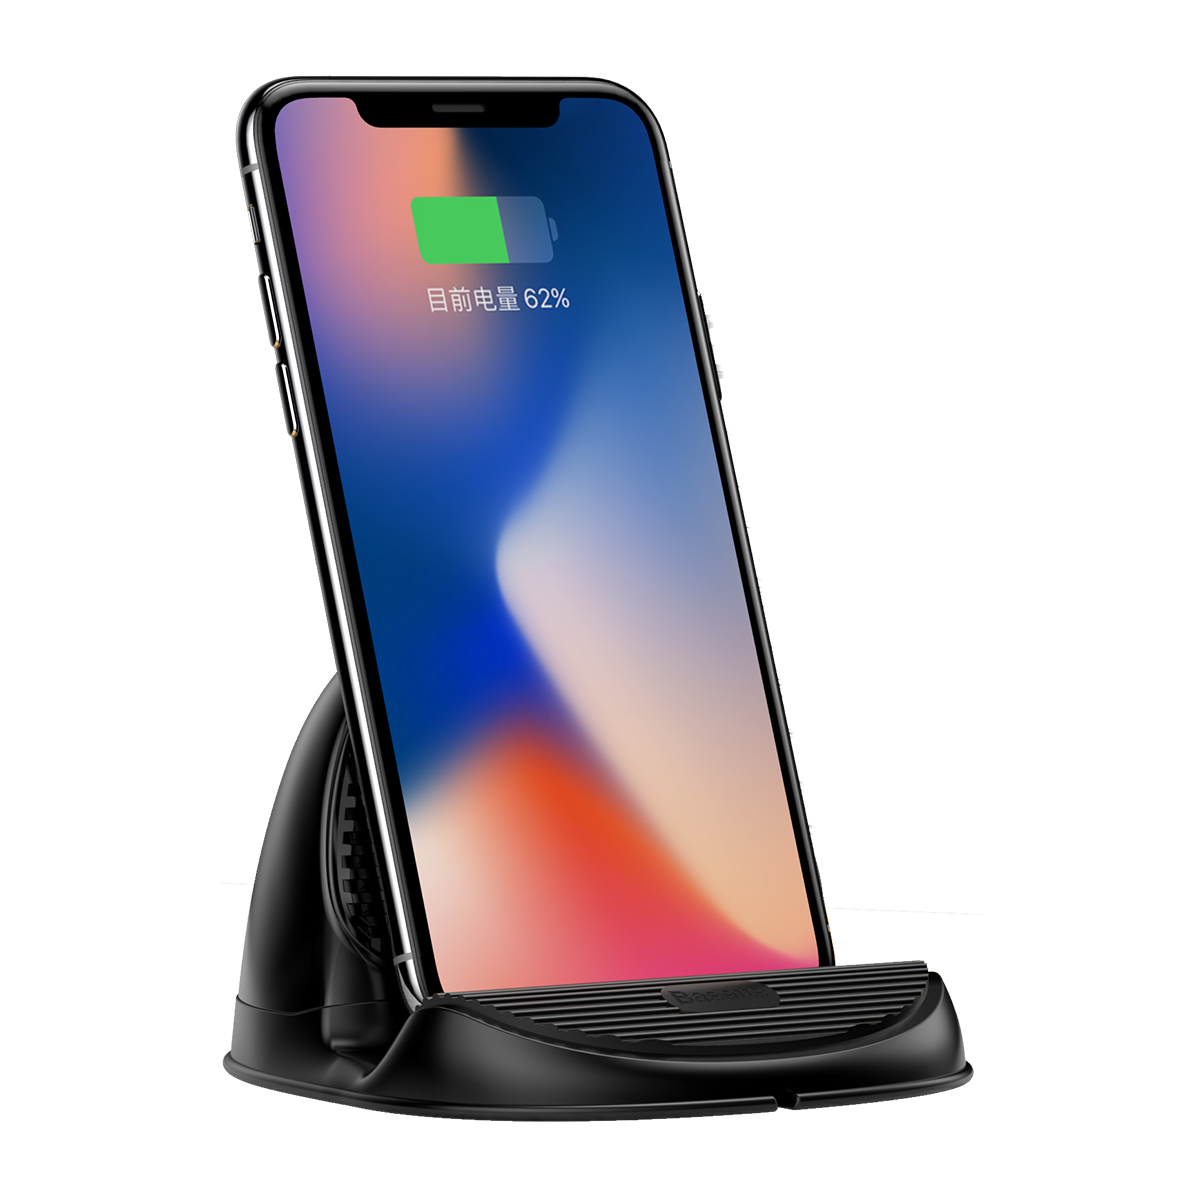 

Baseus 7.5W 10W Non-slip Desktop Qi Wireless Fast Charger Fan Cooling for iPhone X S8 S9